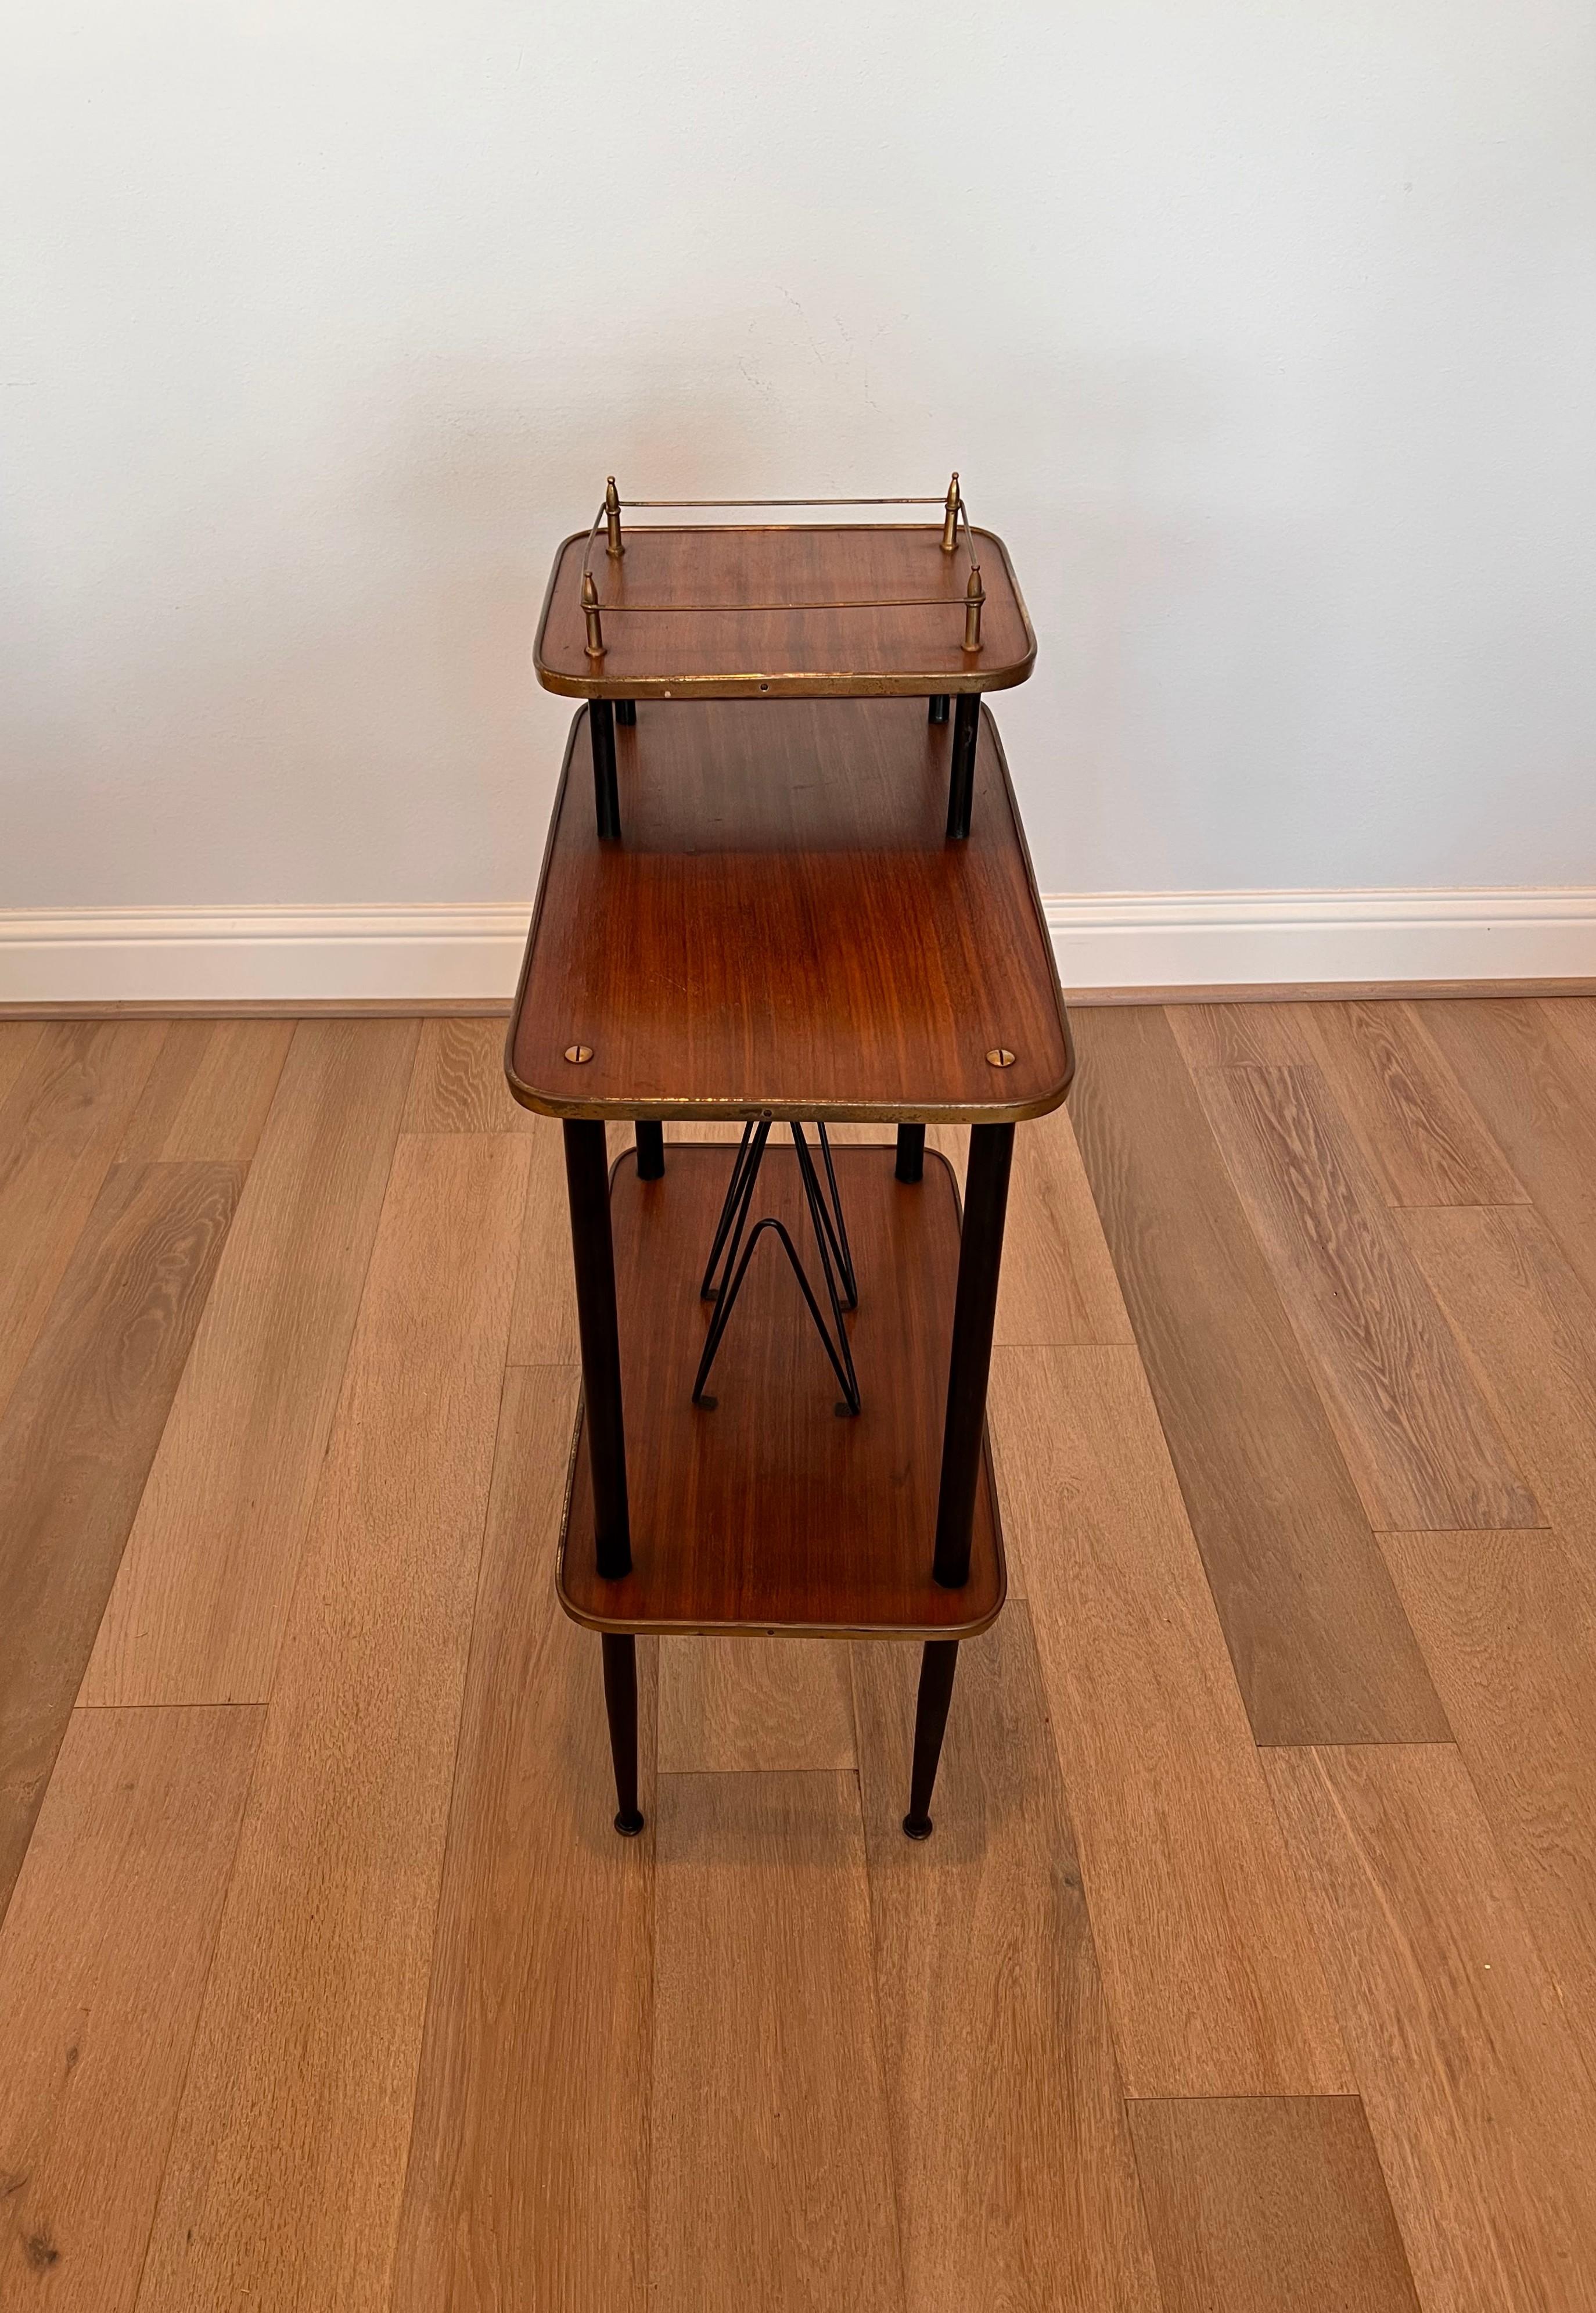 A vintage, circa 1950s, midcentury Italian modern tiered étagère side table. 

Born in Italy in the Mid-20th Century, crafted of teakwood, patinated brass and lacquered black metal, featuring an open three tier design, with square top tier having